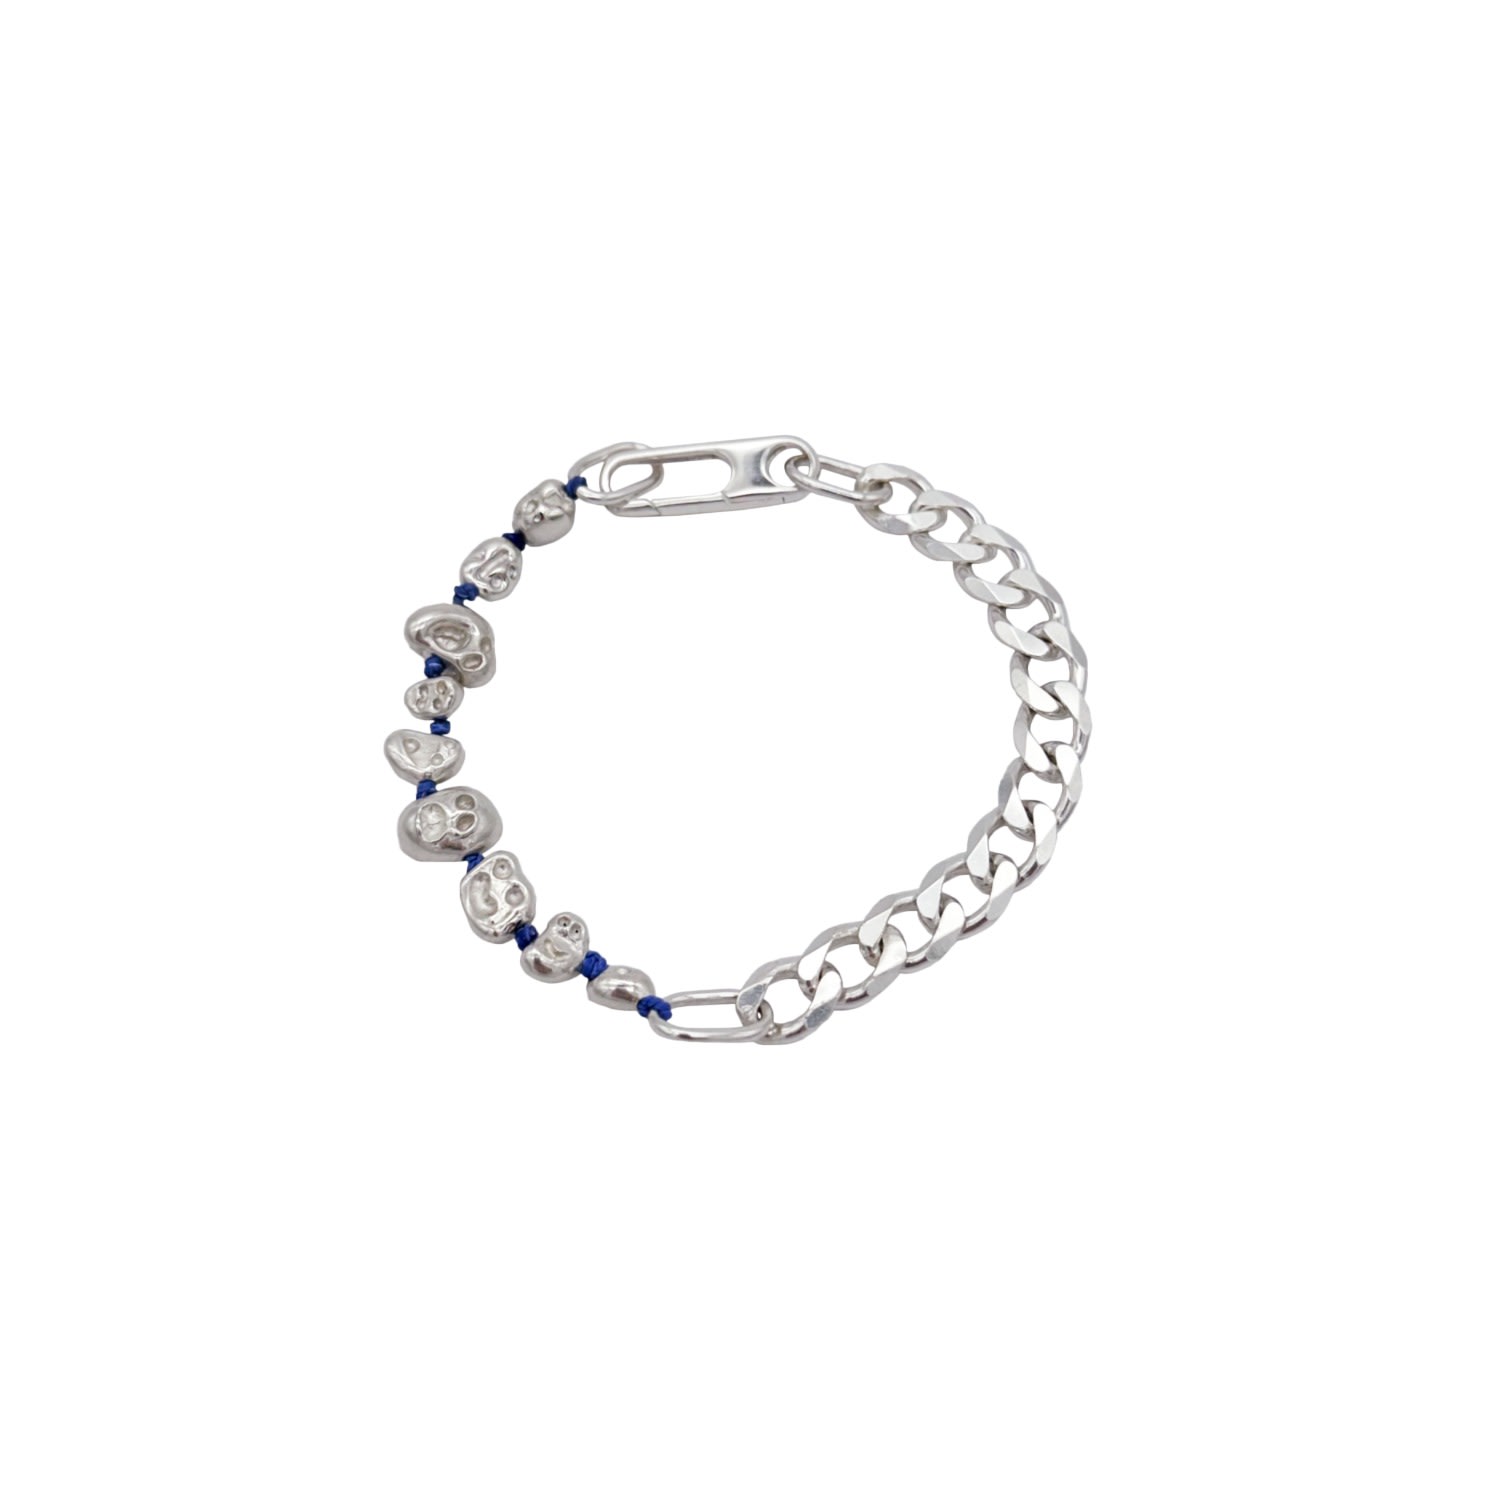 Women’s Silver / Blue Silver Lil Head Cuban Chain Bracelet With Primary Blue Thread Iona Hindmarch Bisset